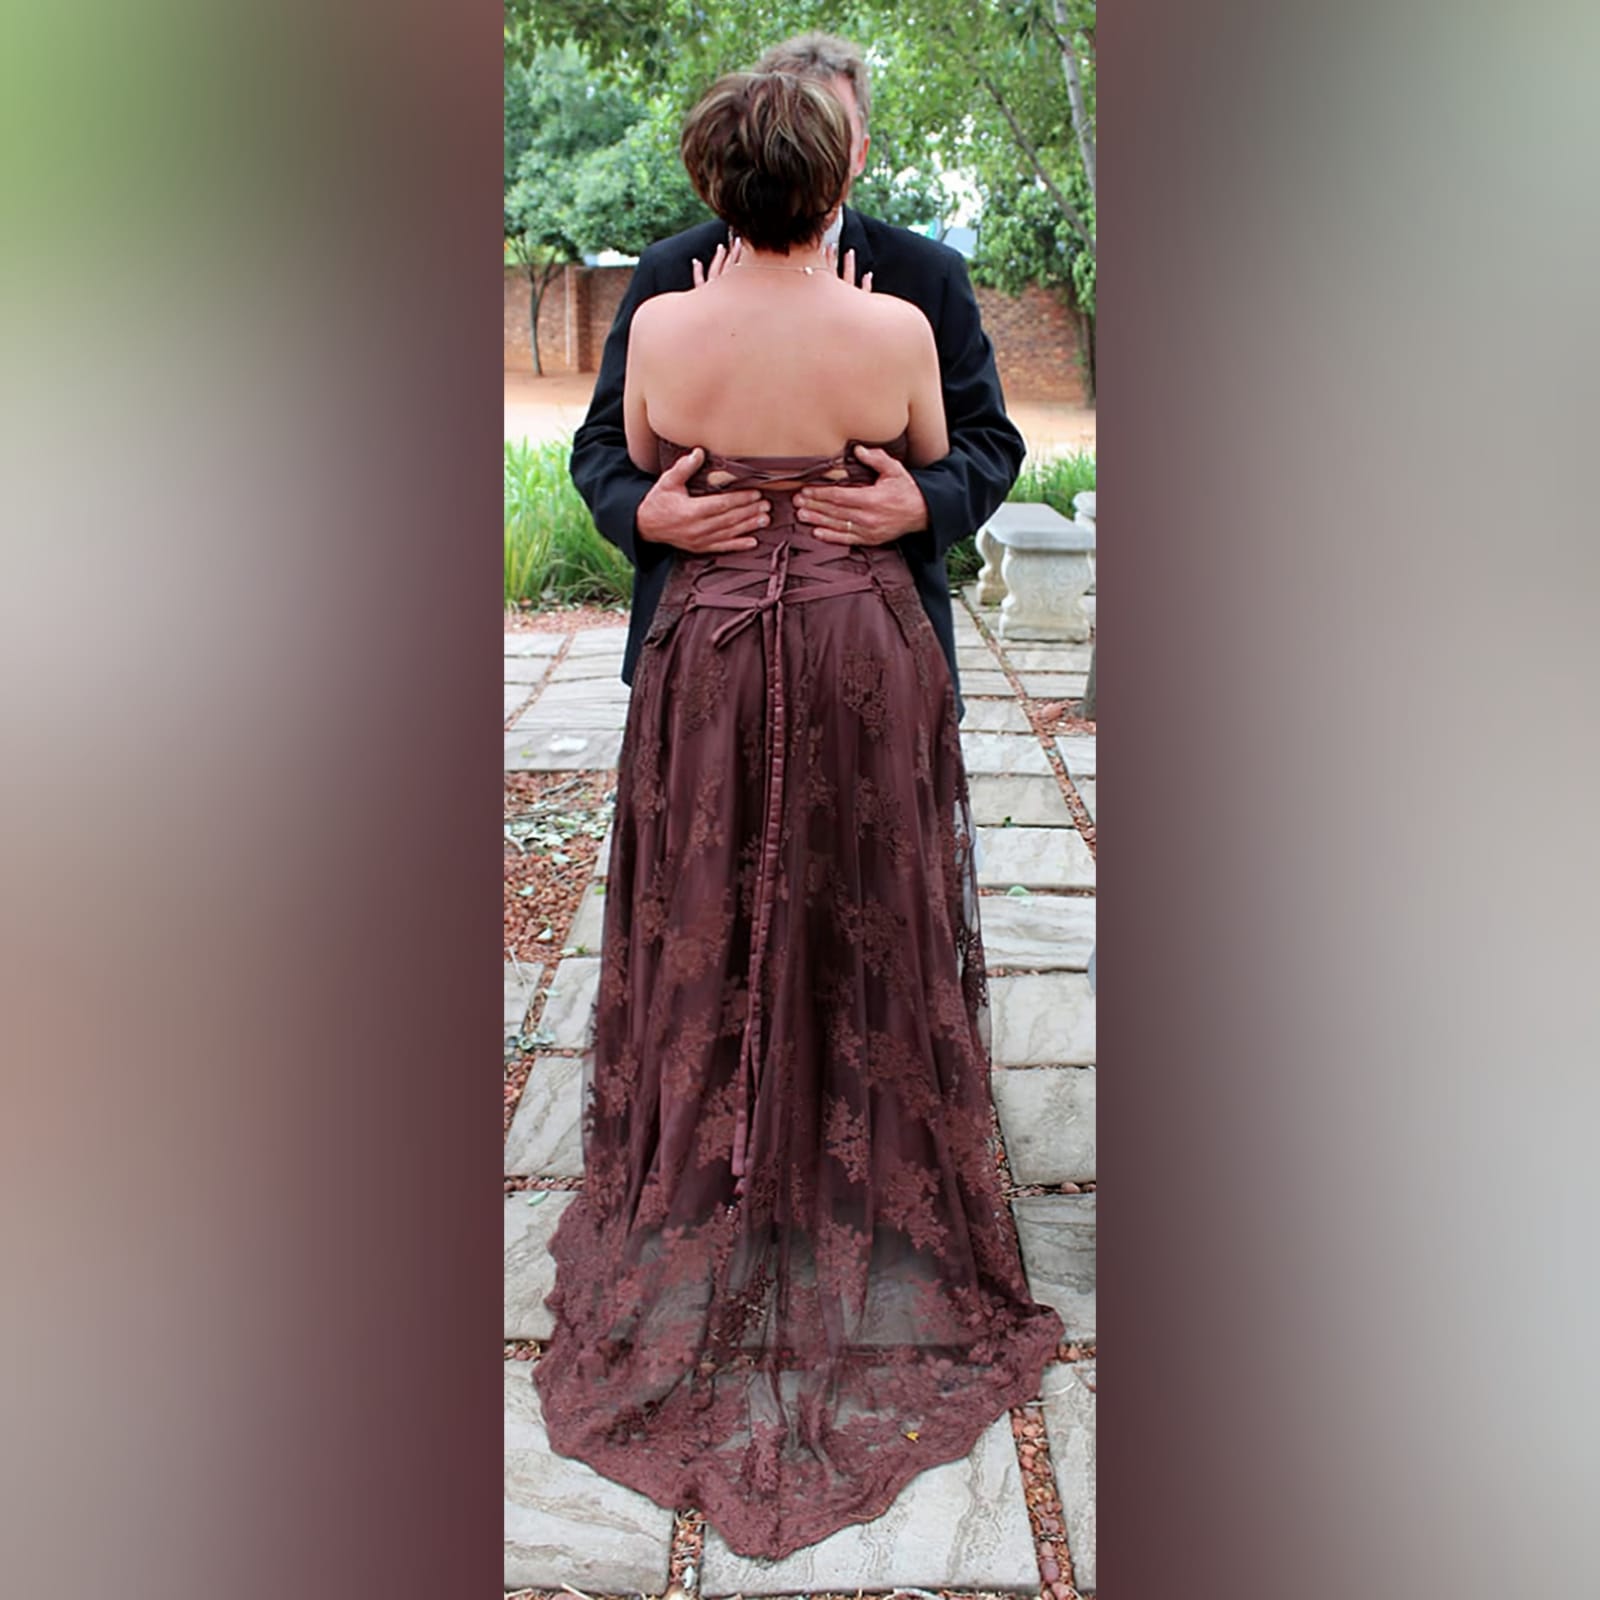 Brown 2 piece lace wedding dress 4 brown 2 piece lace wedding dress. With a flowy skirt, with train. Boob tube corset top with a lace up back.